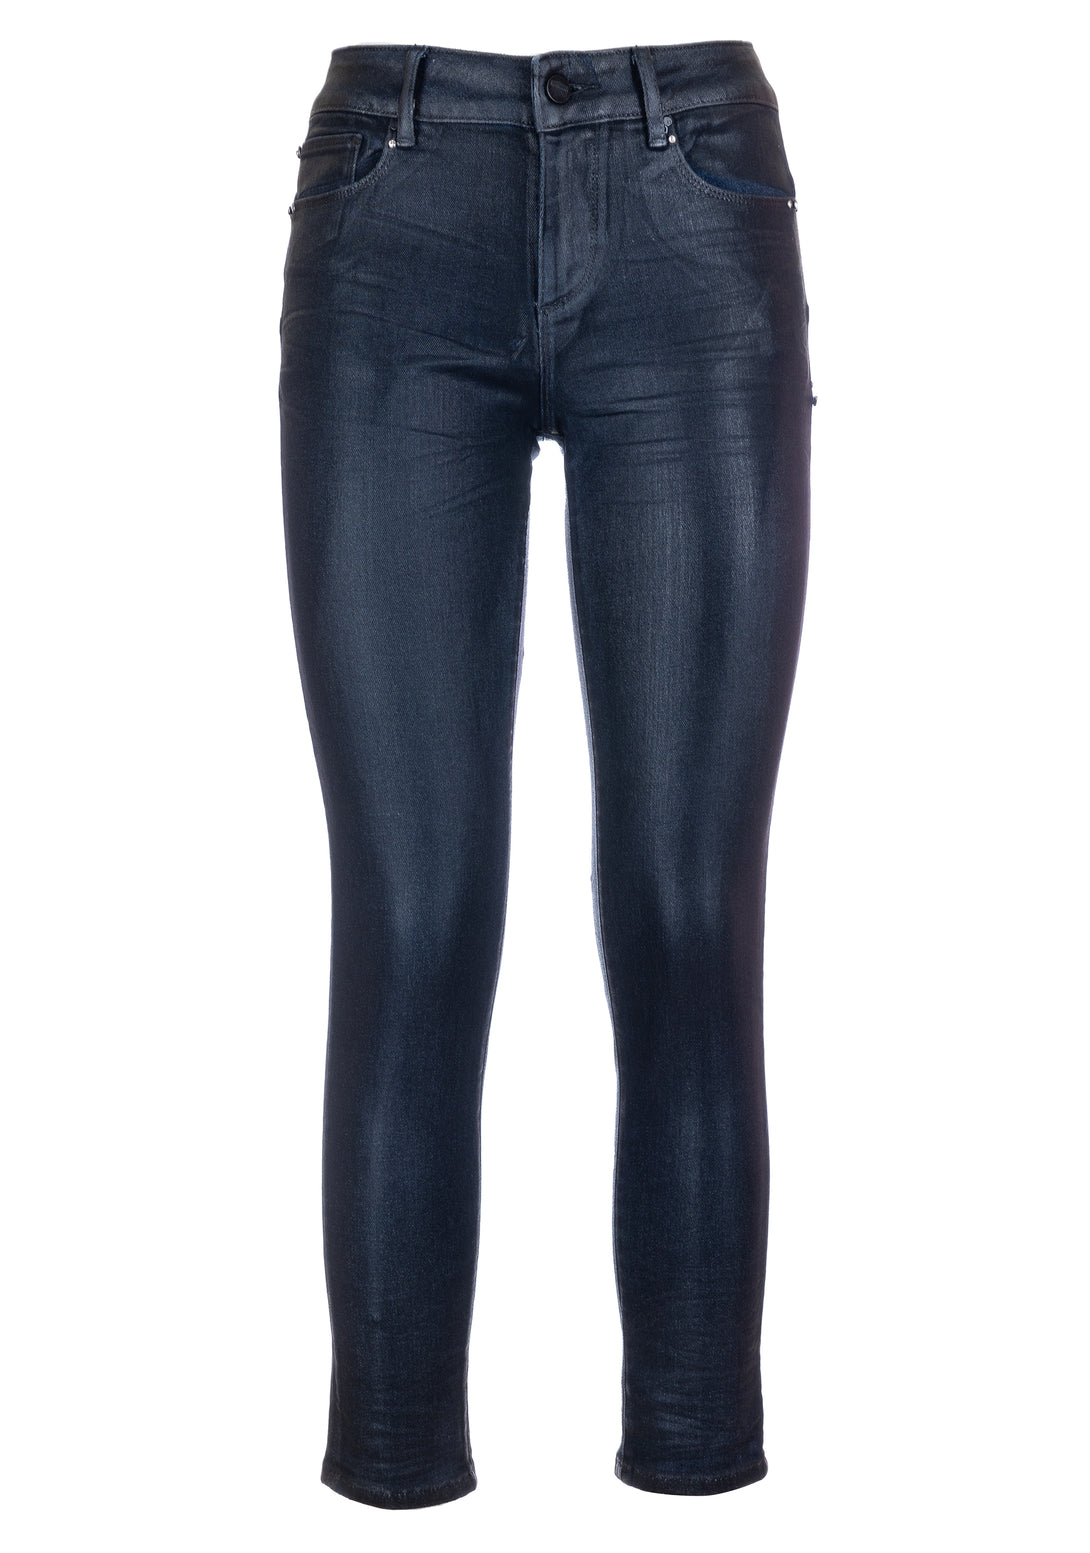 Jeans skinny fit with push up effect made in denim with coating effect